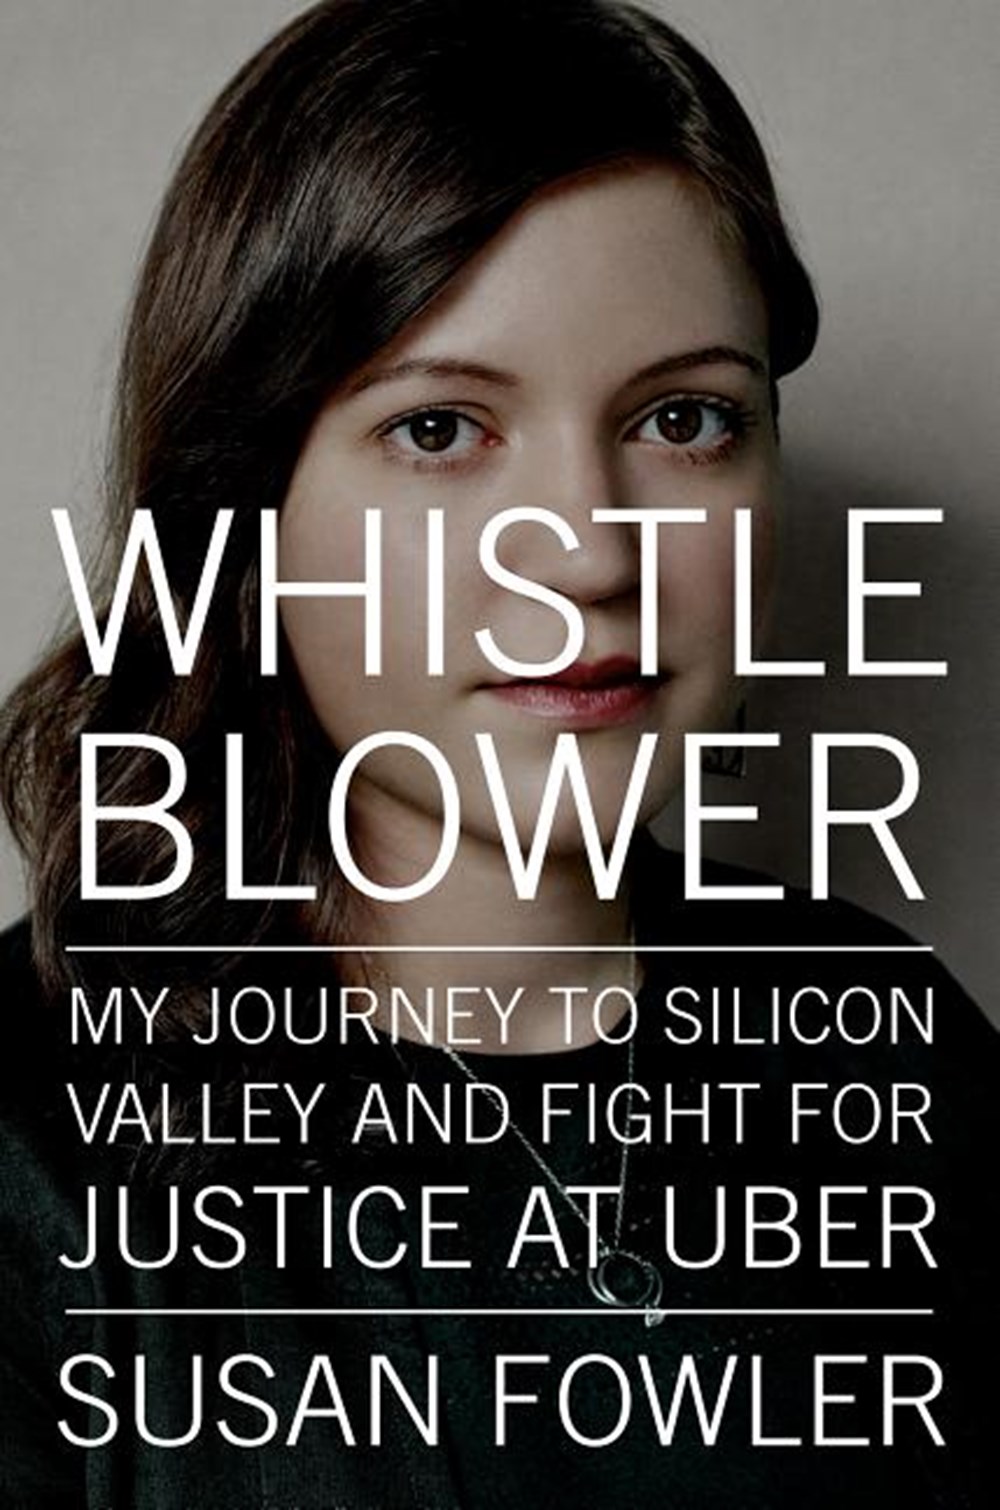 Whistleblower My Journey to Silicon Valley and Fight for Justice at Uber